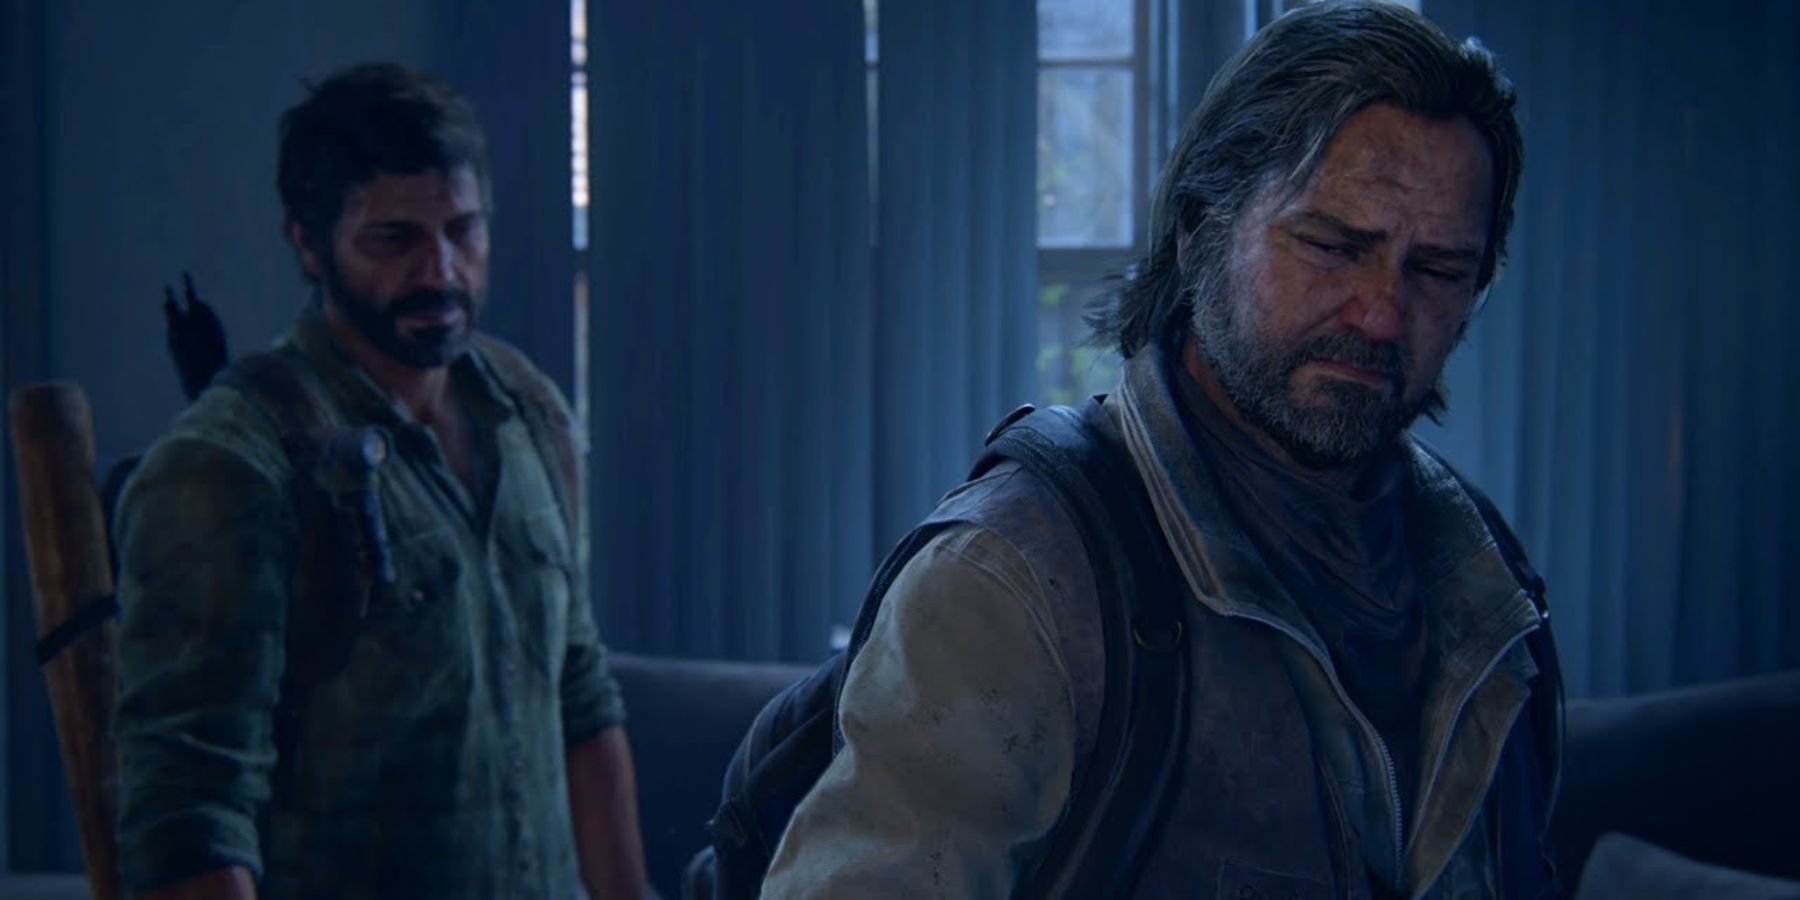 The Last of Us' Episode 3 Recap: The Heart-Wrenching Tale of Bill and Frank  - CNET